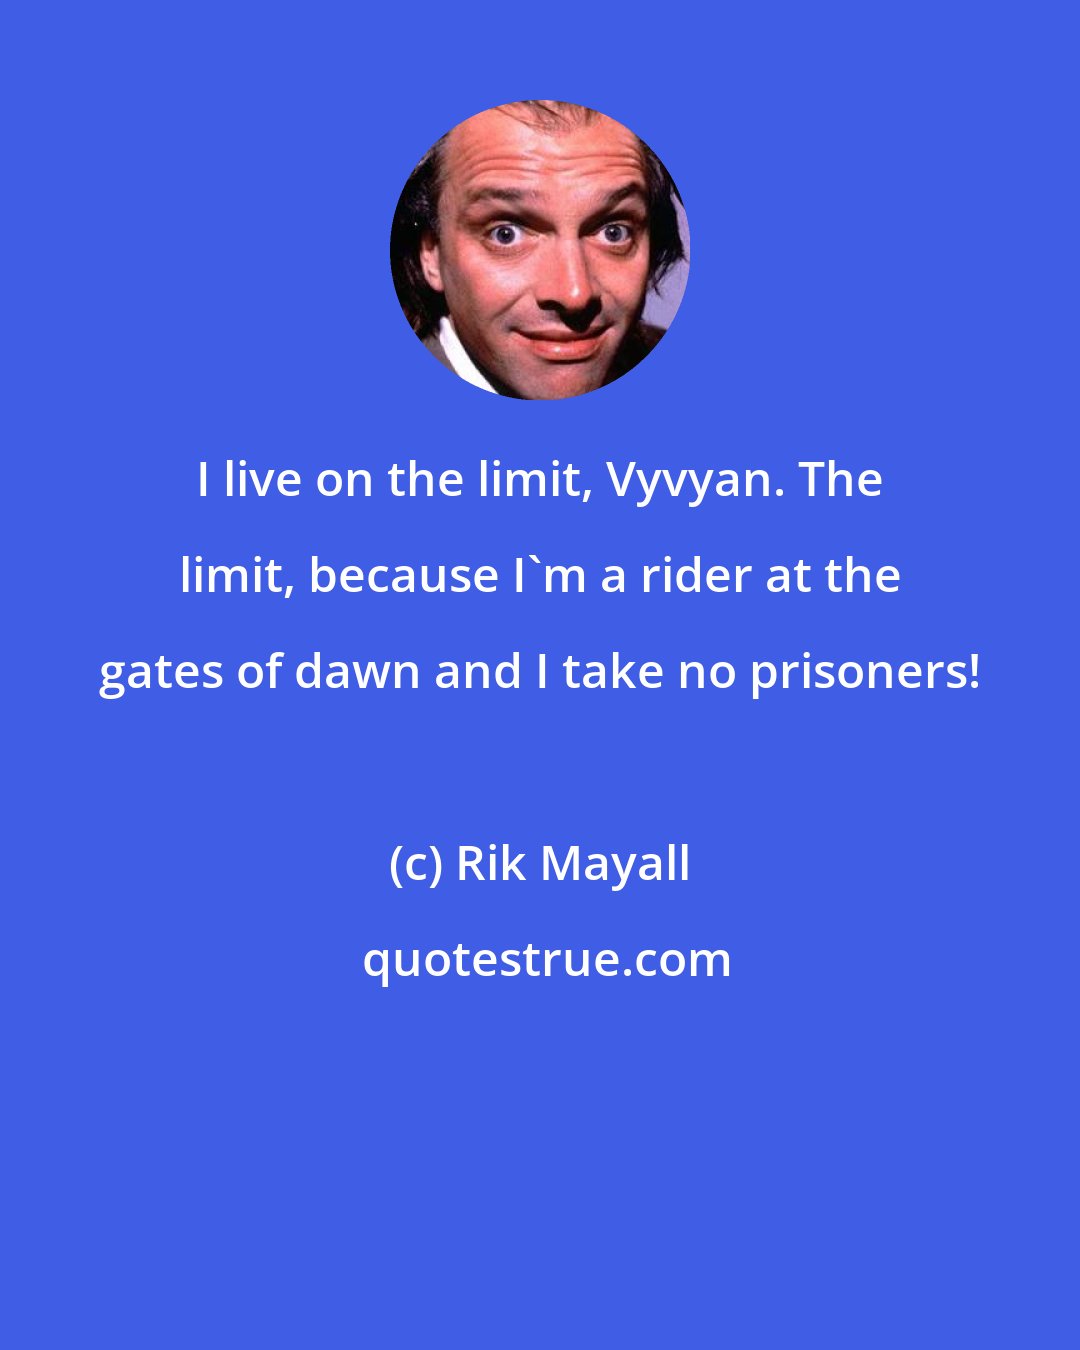 Rik Mayall: I live on the limit, Vyvyan. The limit, because I'm a rider at the gates of dawn and I take no prisoners!